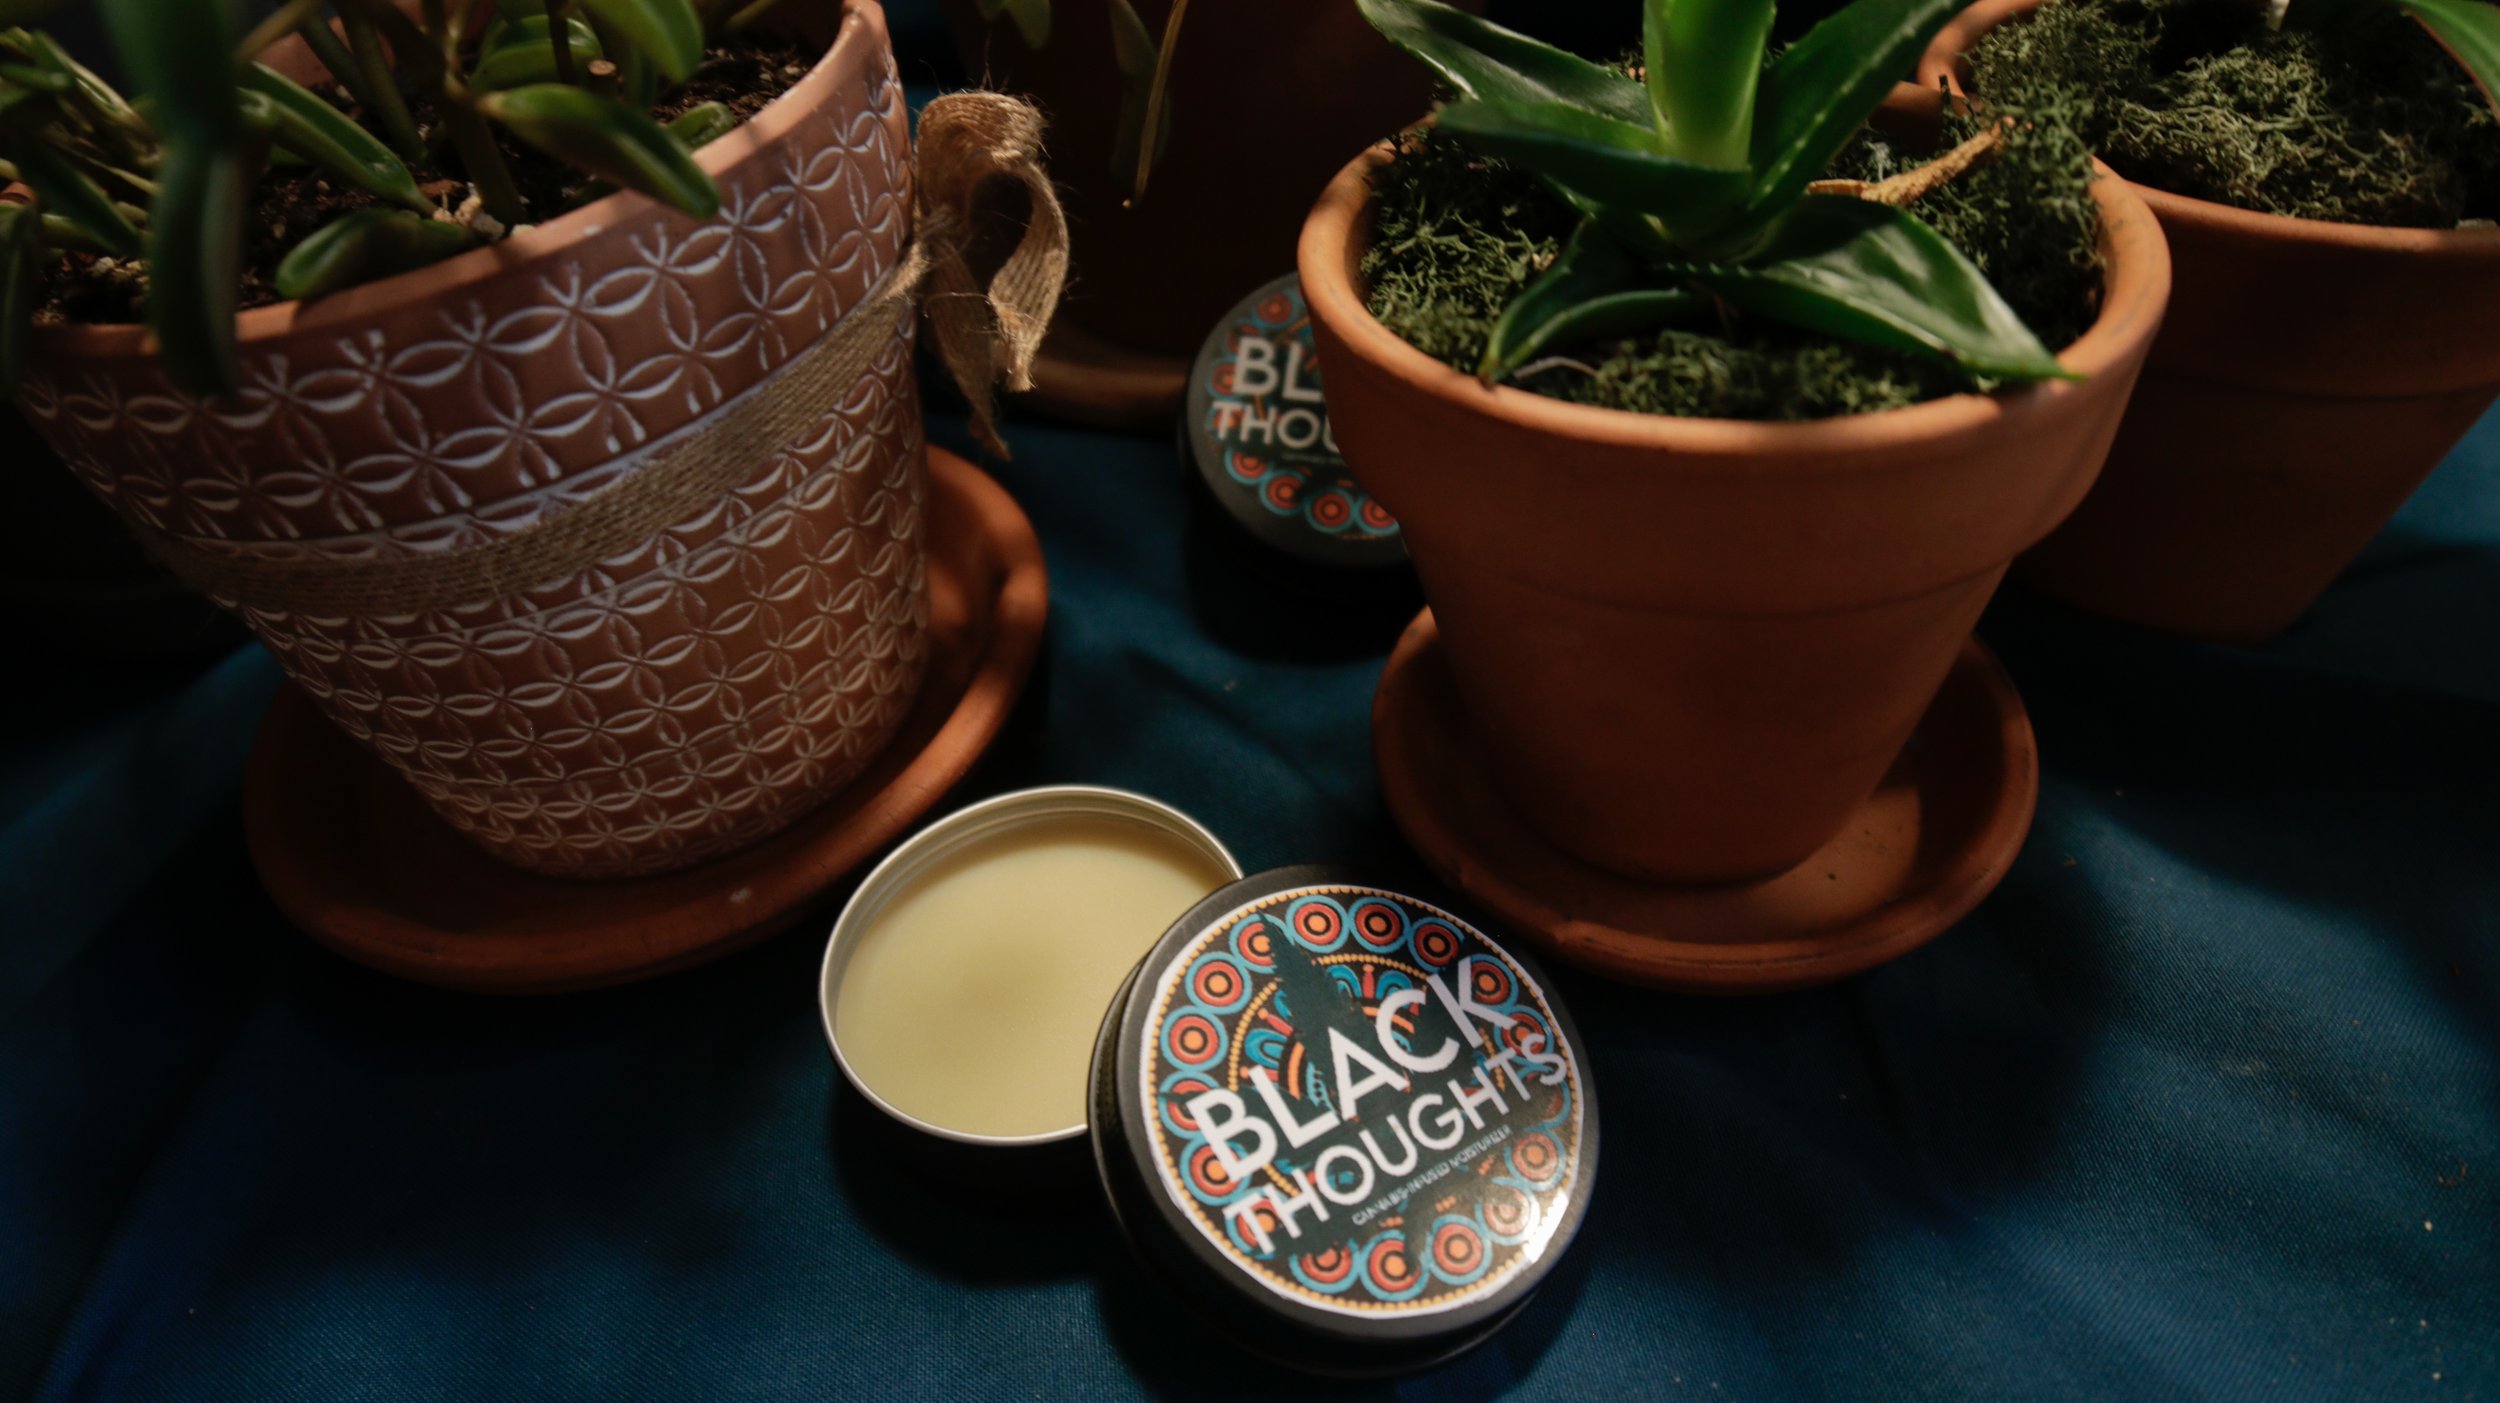 Black thoughts body butter.jpg